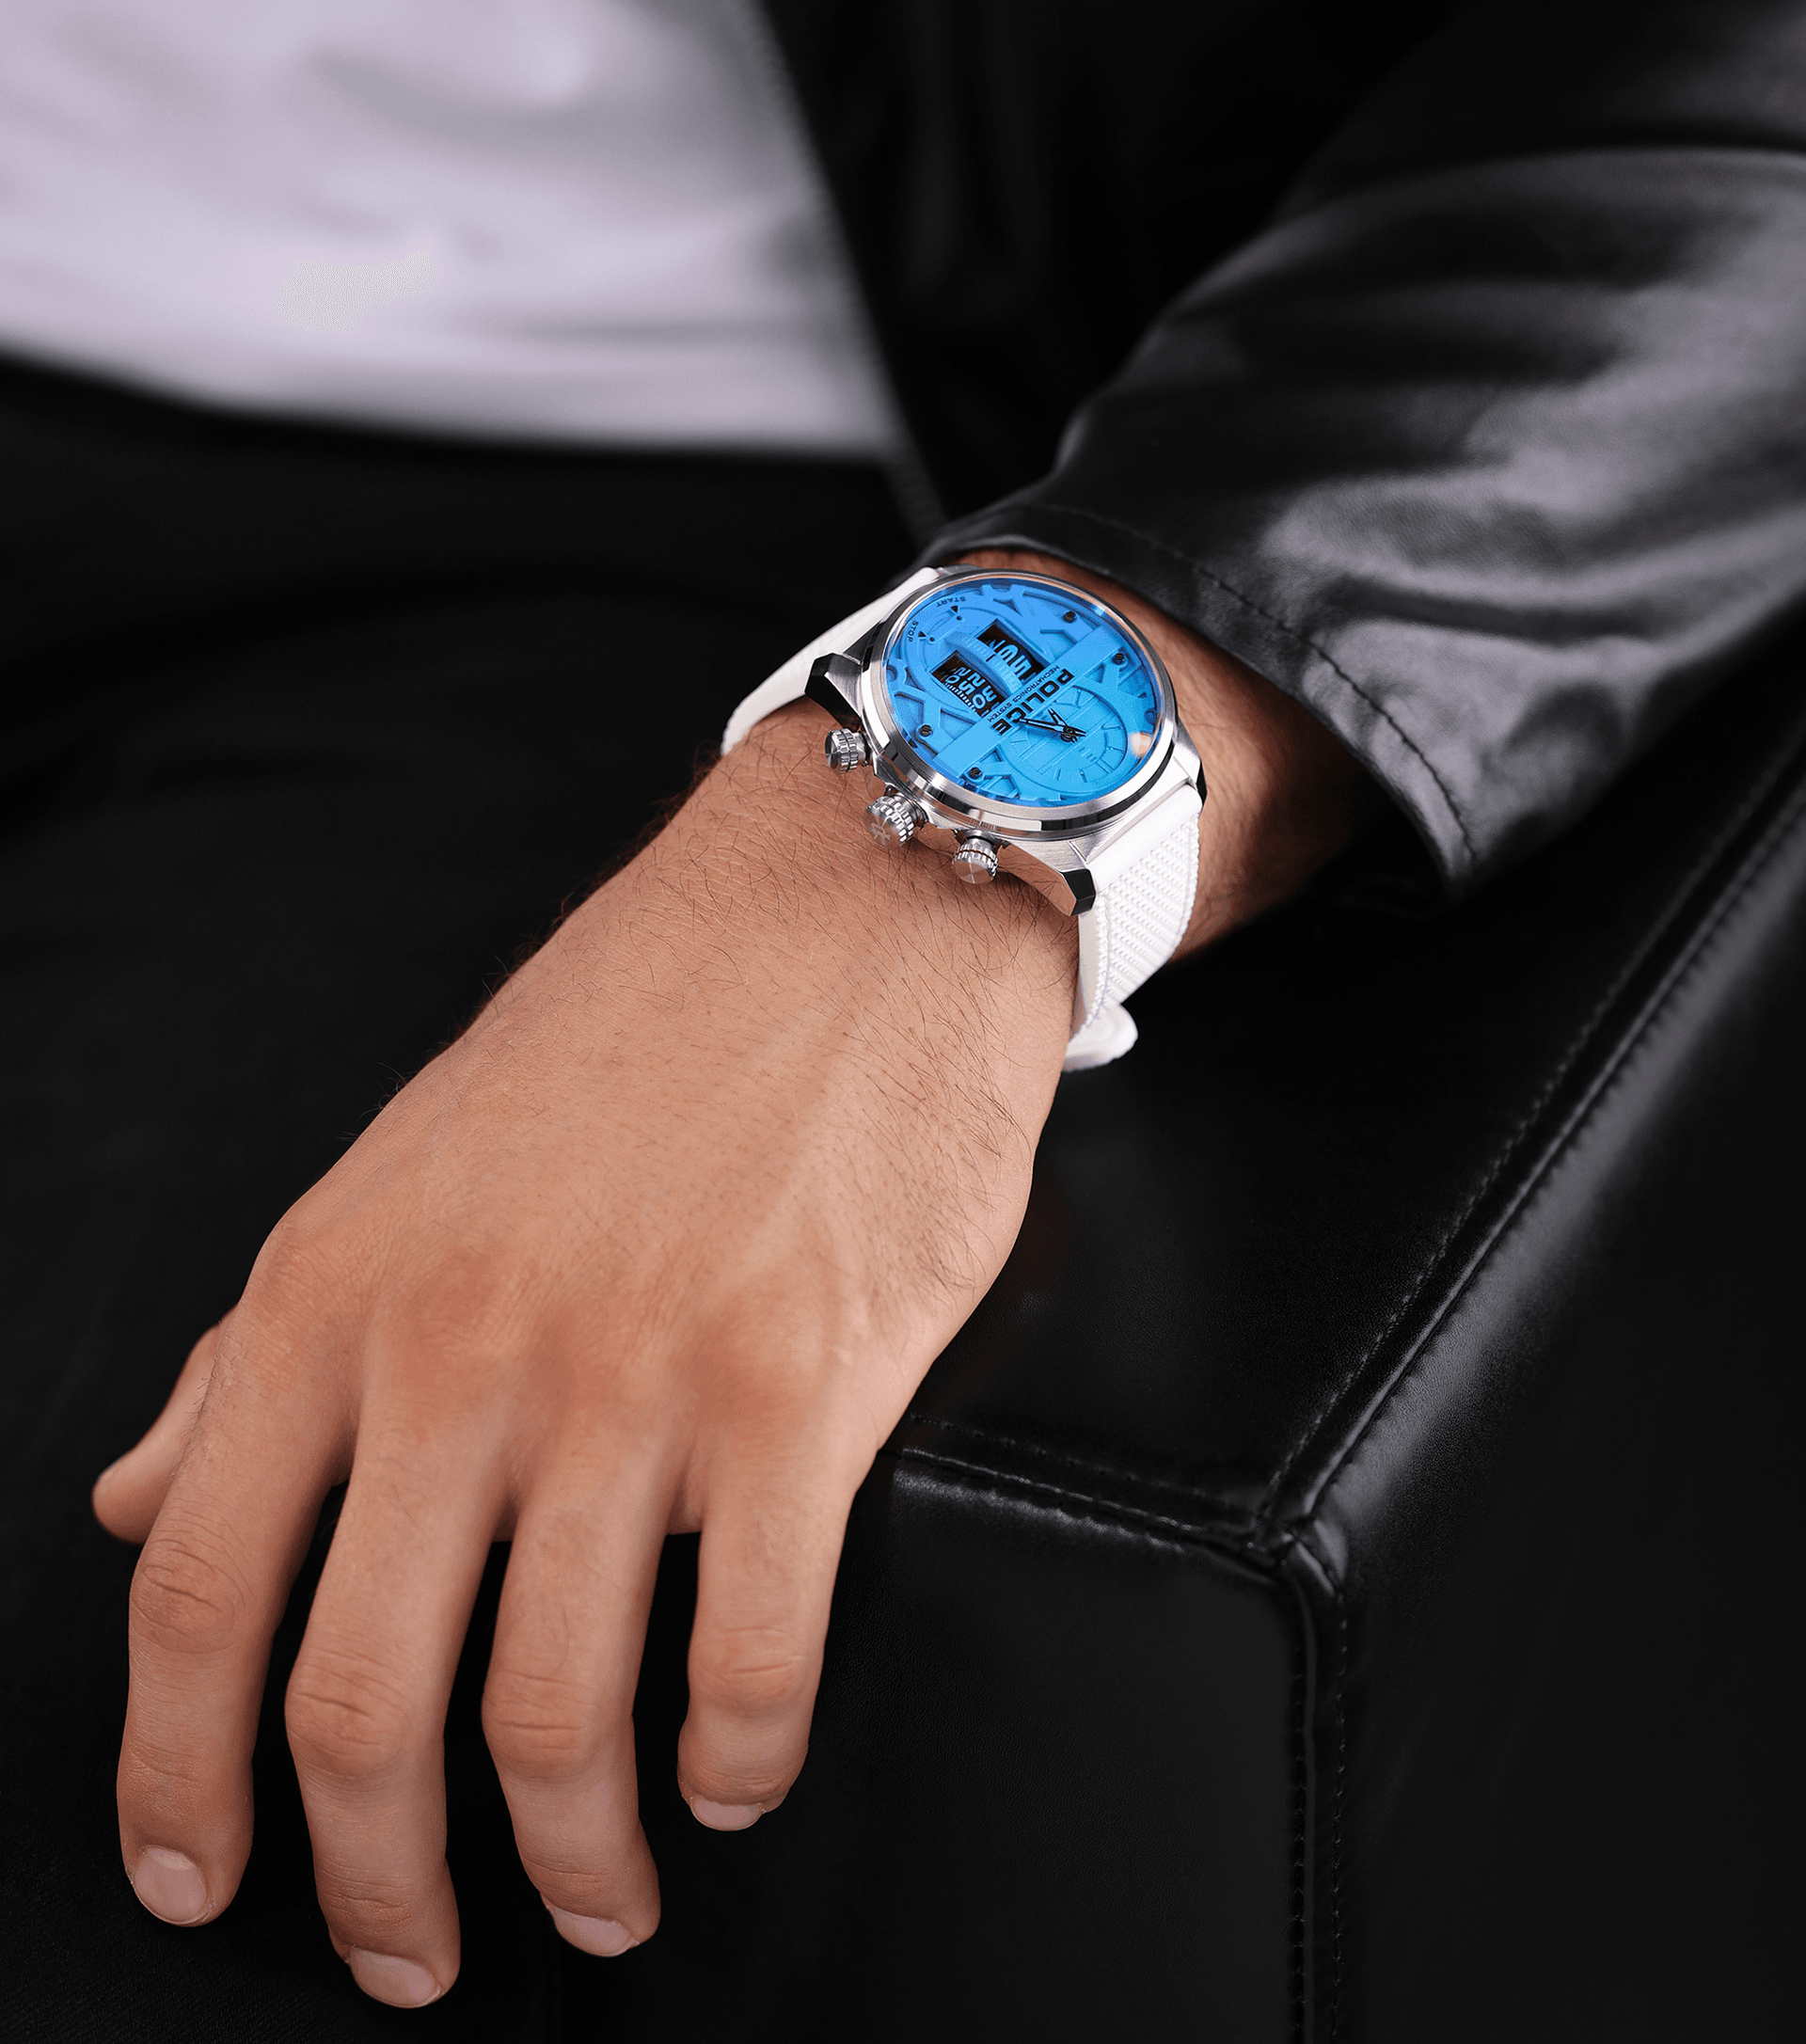 Police watches - Rotor Watch By Police For Men Blue, Blue